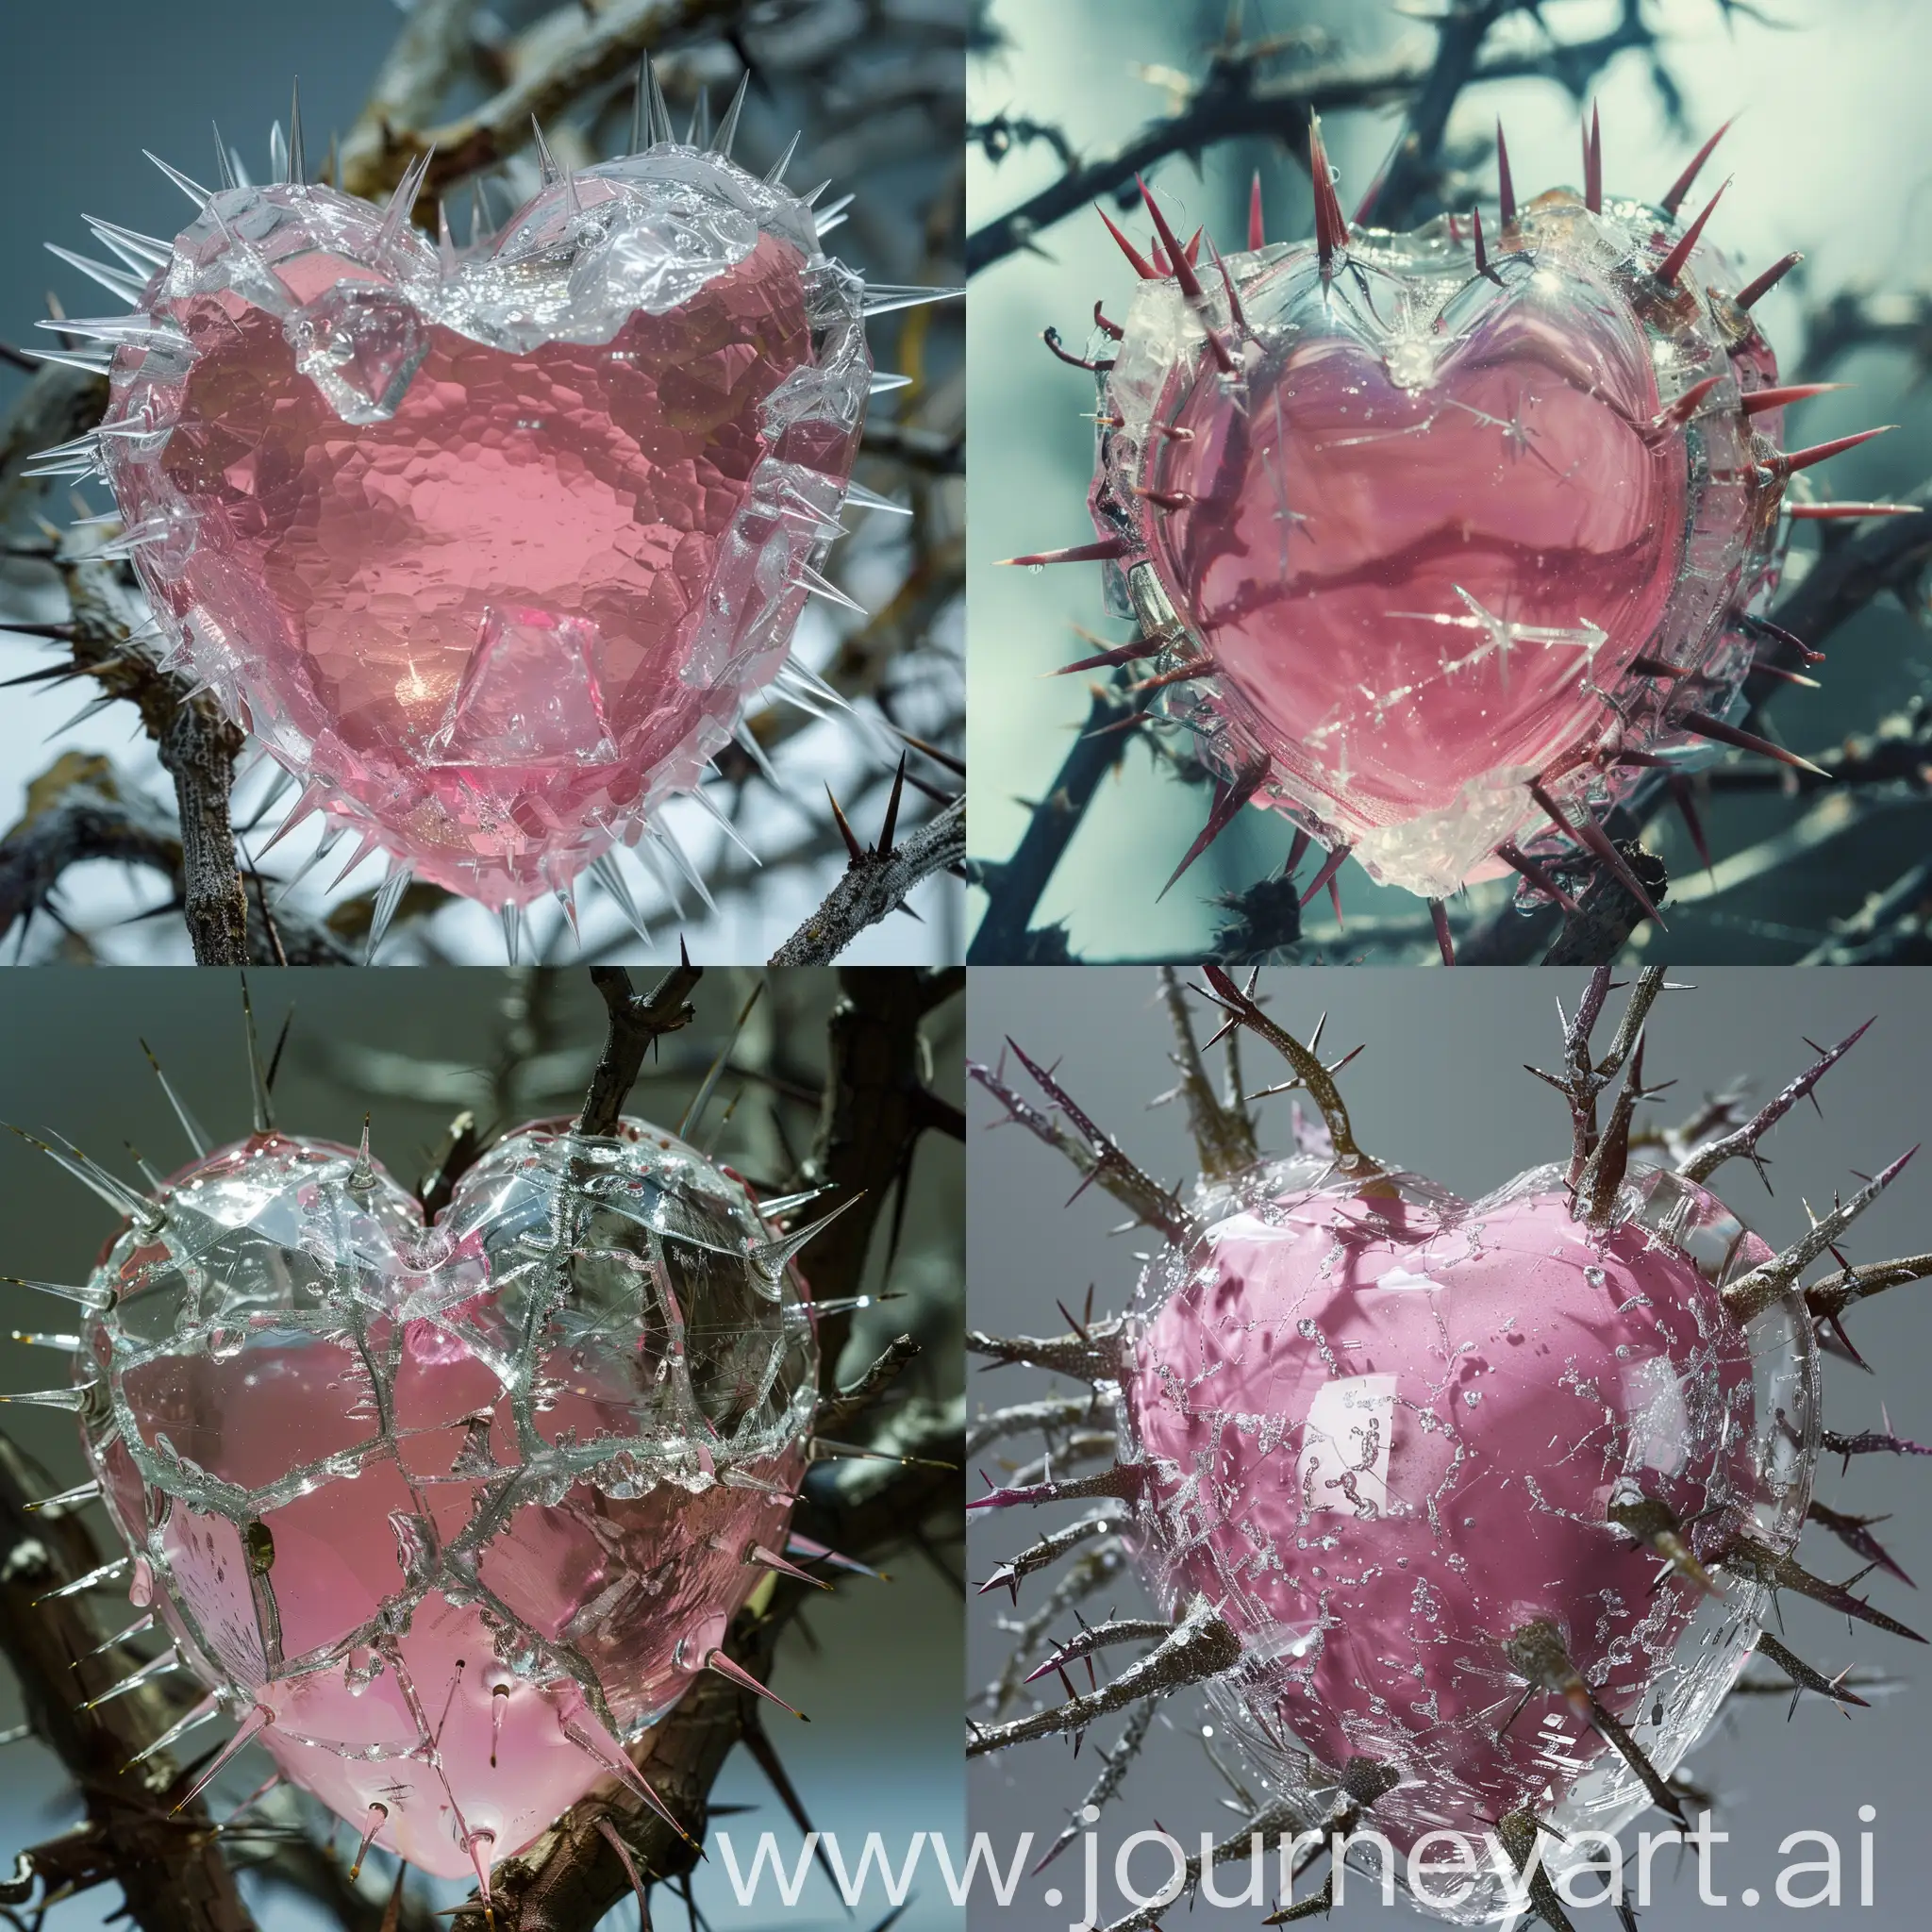 A pink heart covered by clear glass. Outside the clear glass, there were sharp thorns surrounding it.